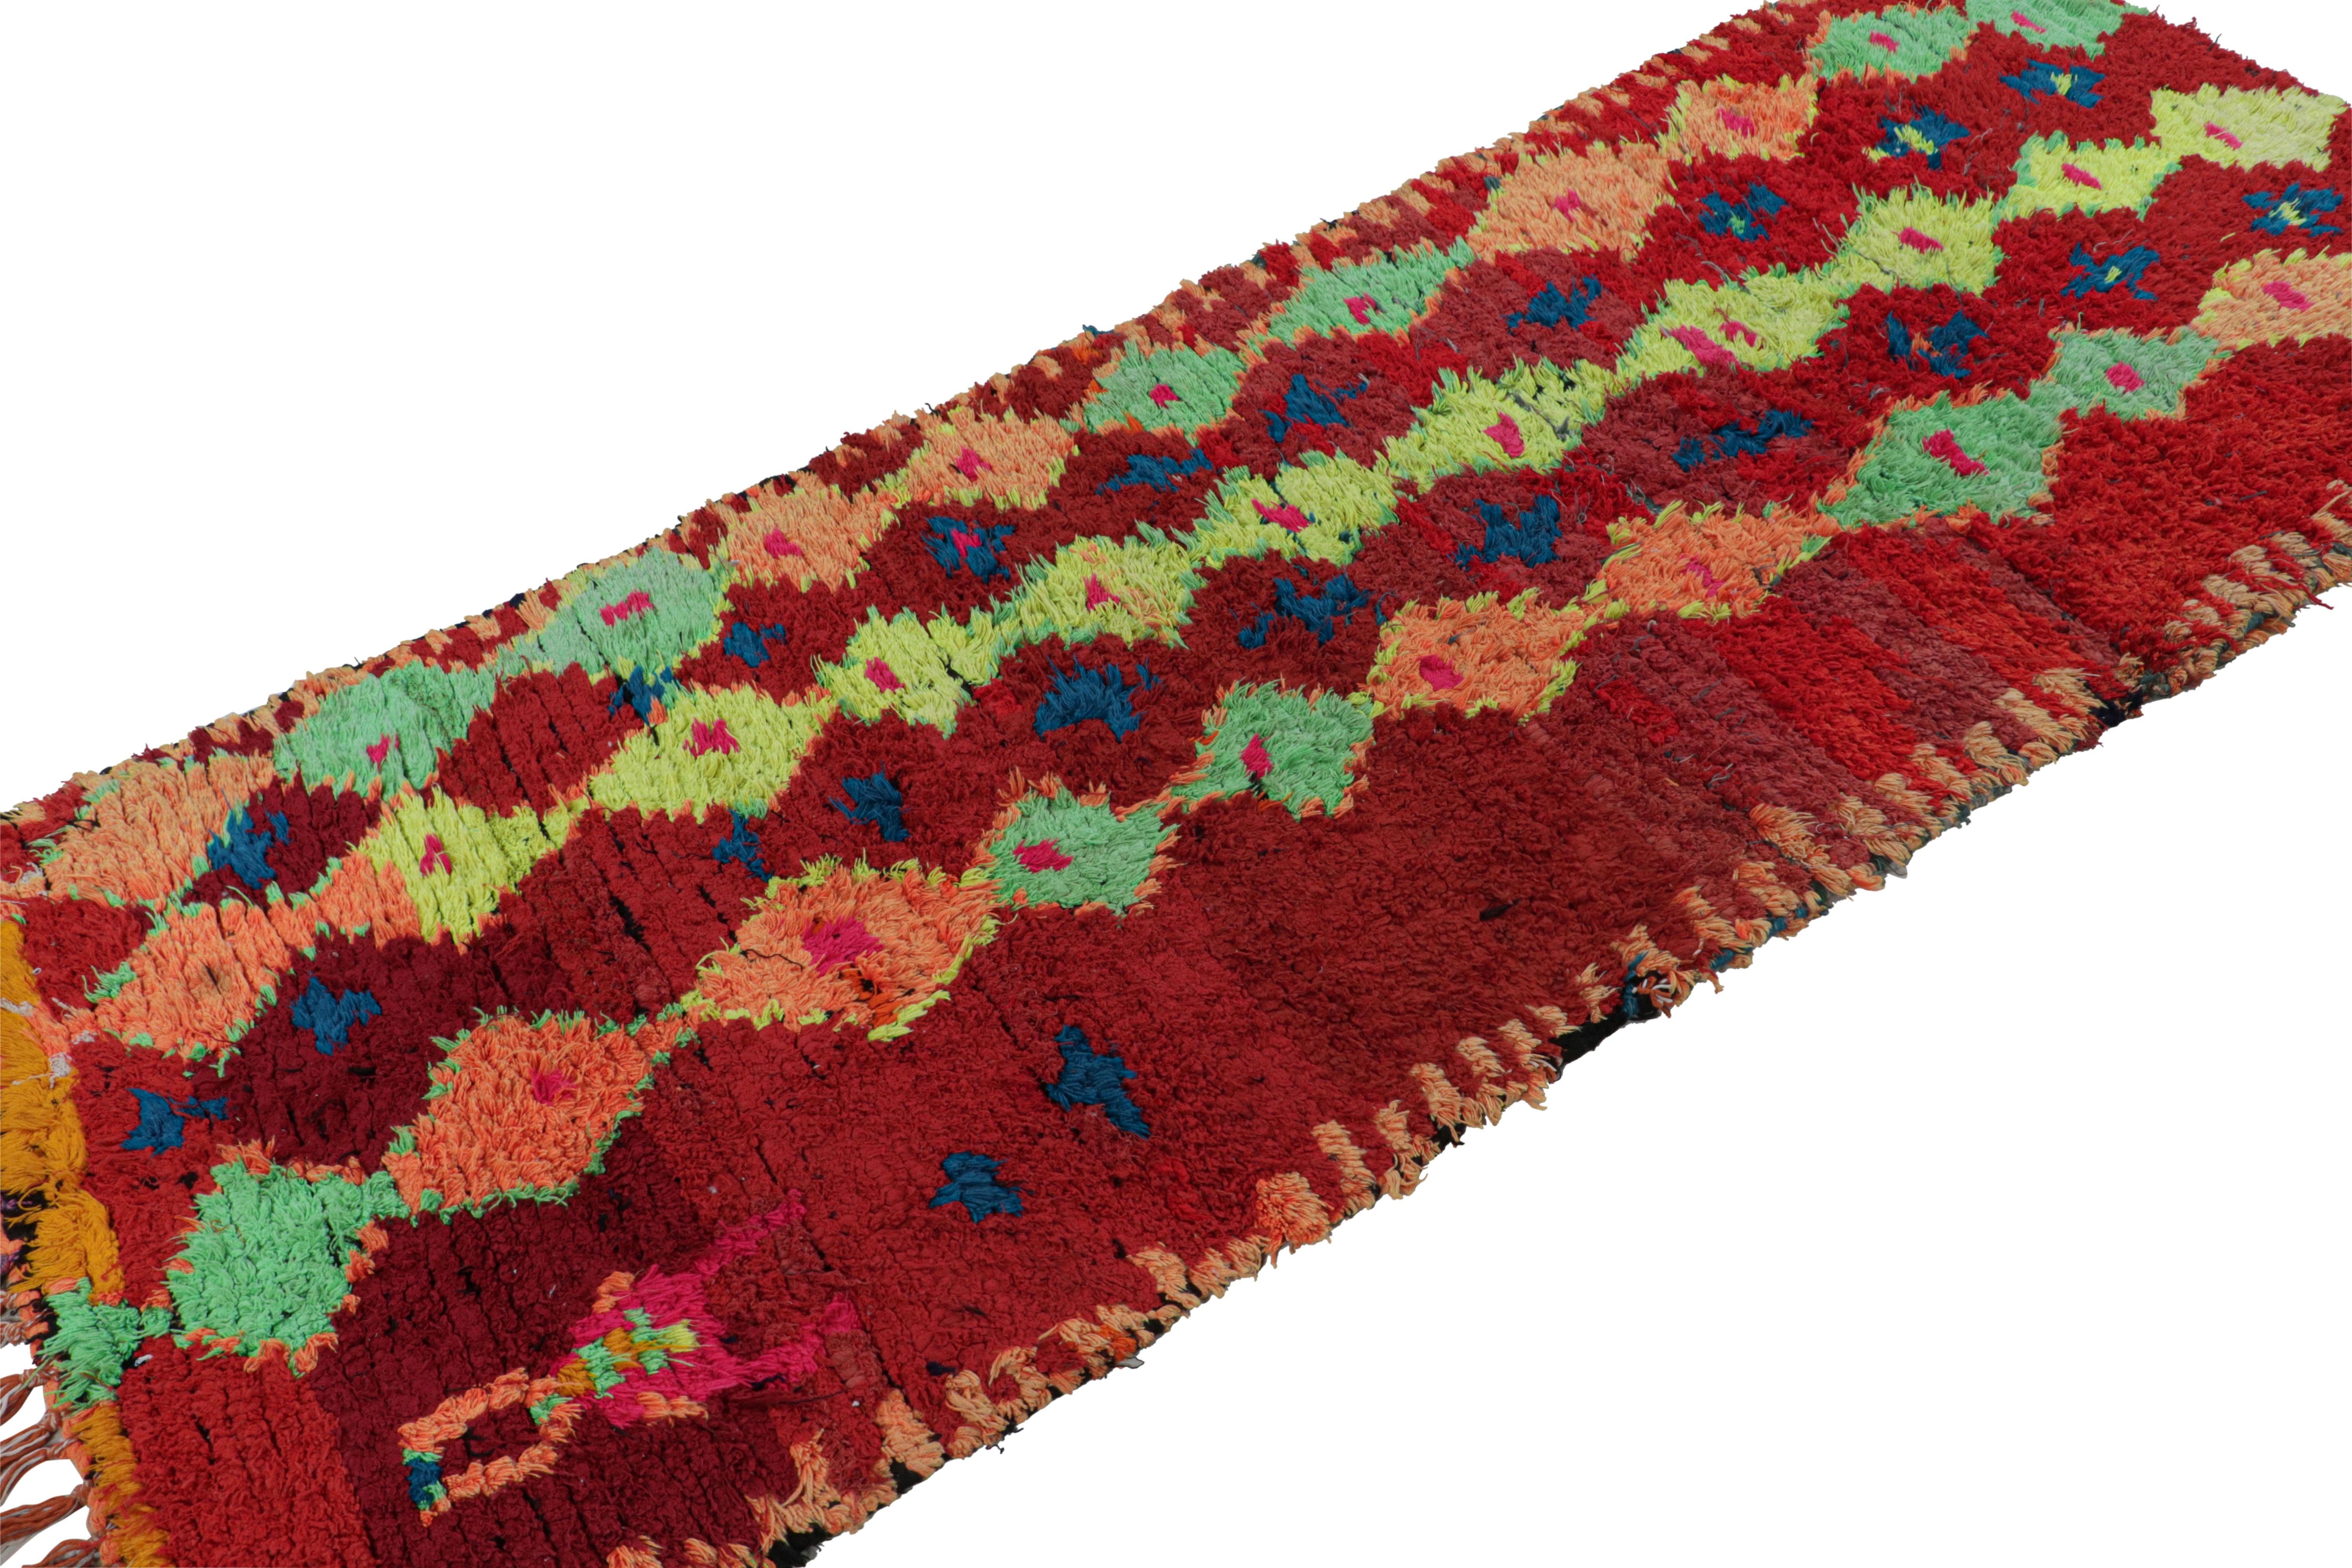 Hand-knotted in wool circa 1950-1960, this 4x9 vintage Moroccan rug with geometric patterns hails from the Azilal tribe.  

On the Design: 

This piece enjoys a rich burgundy red field, with polychromatic primitivist Berber diamond motifs, or